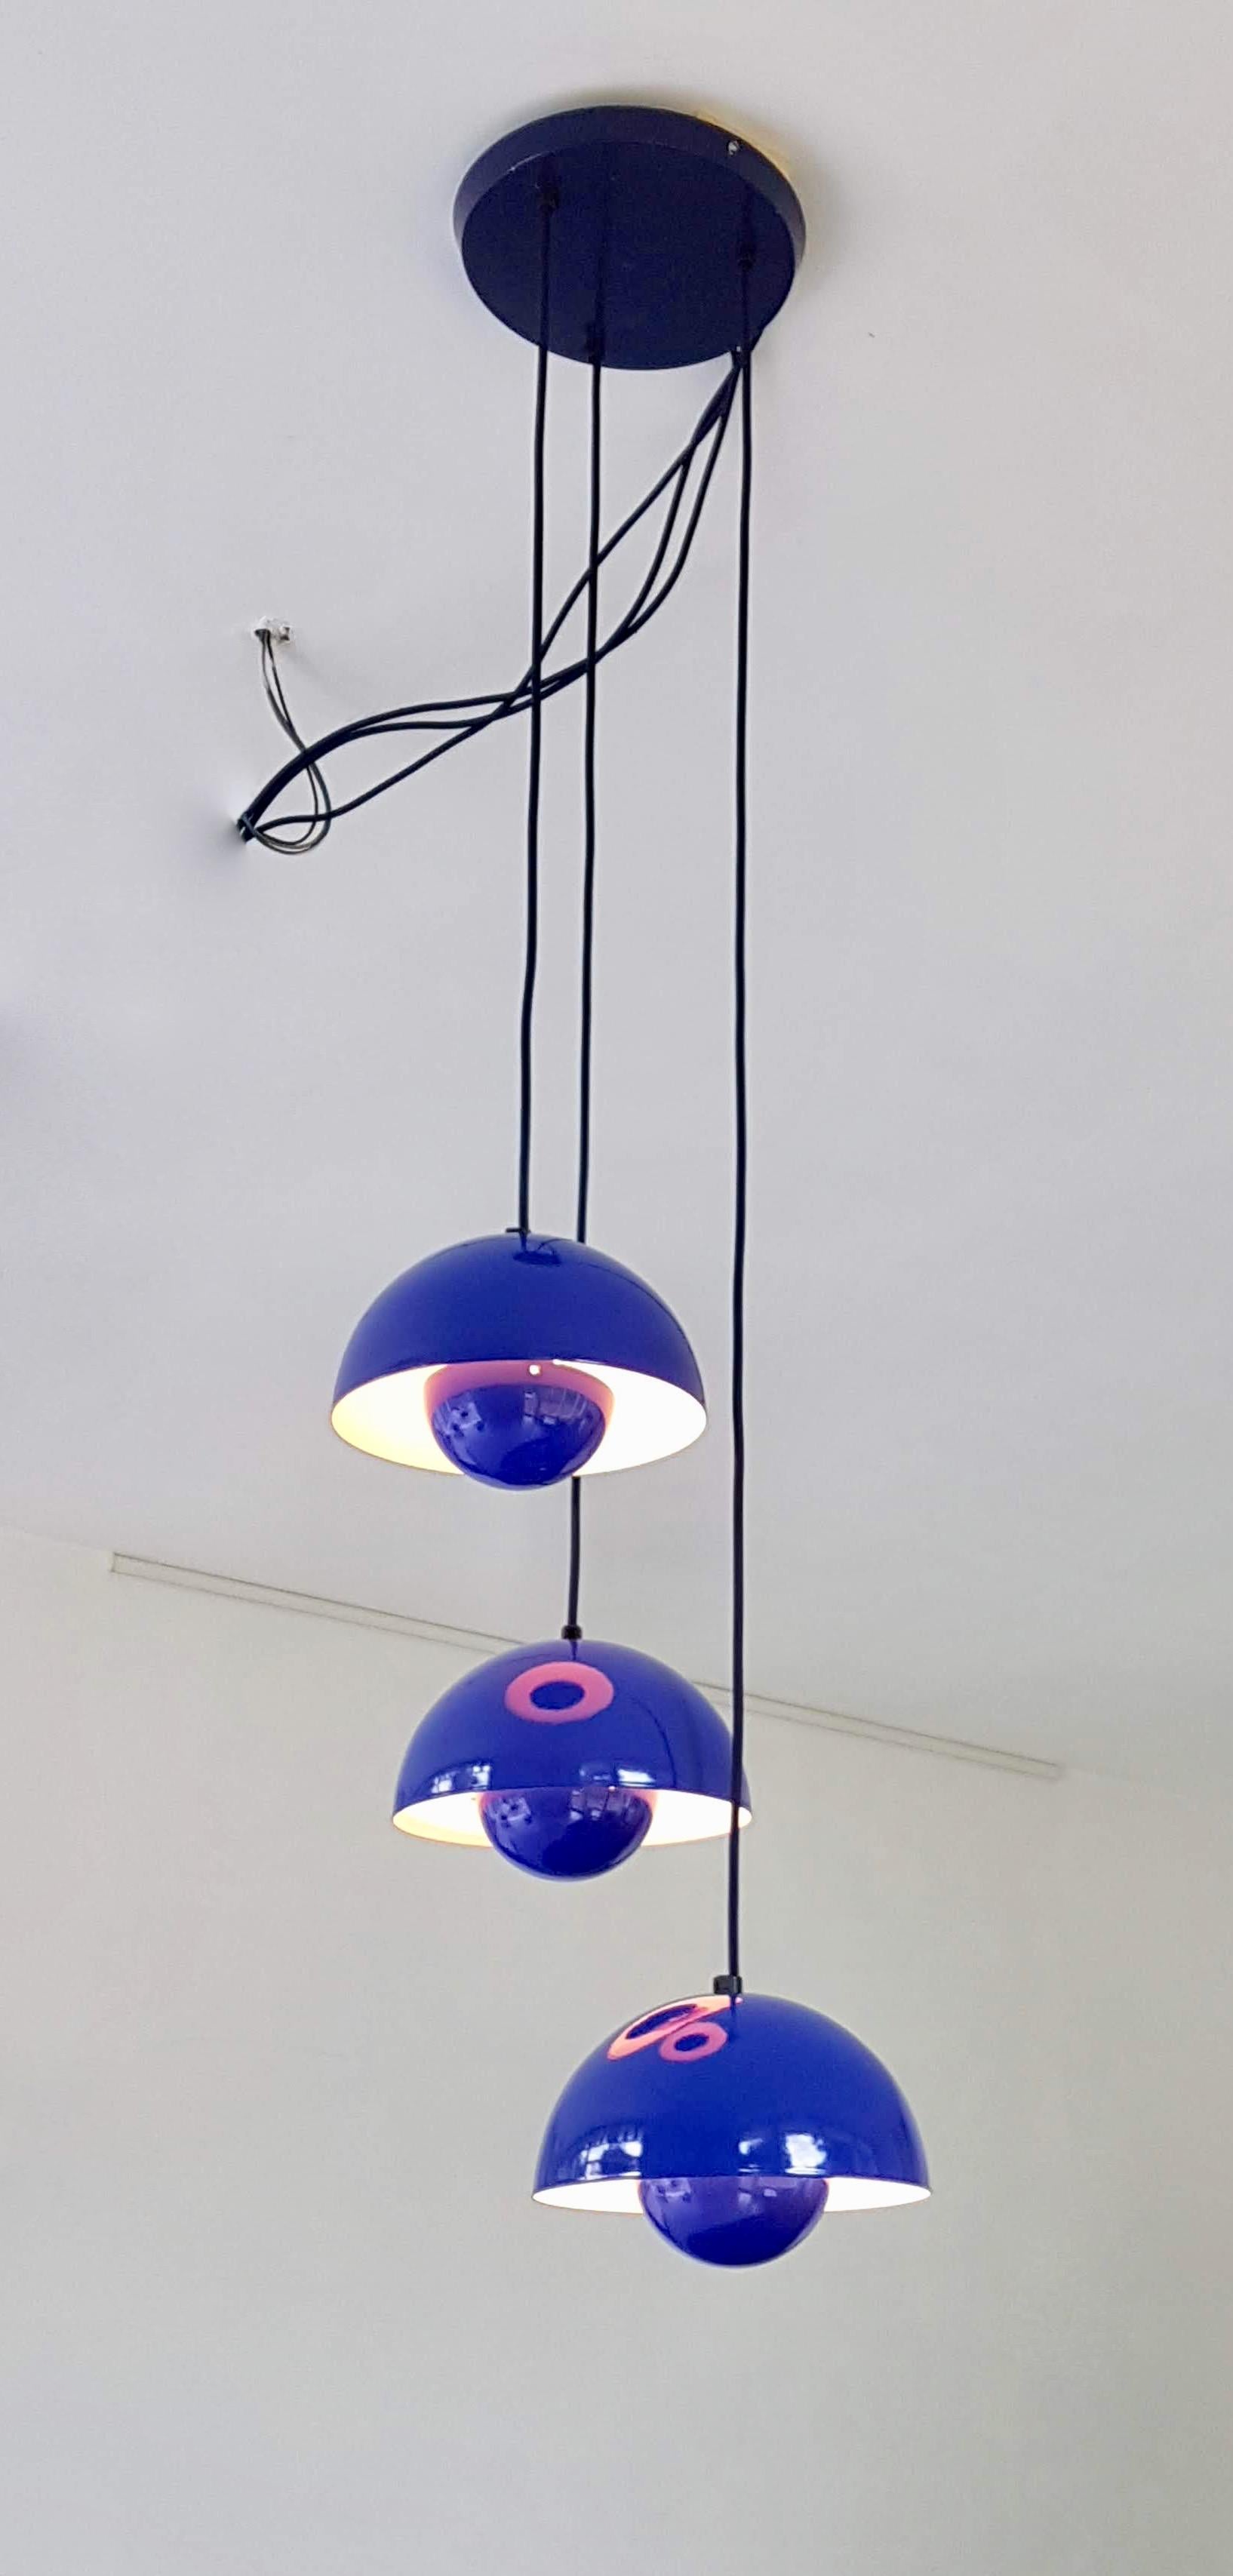 'Flower Pot chandelier by Verner Panton consisting of three mounted iconic 'Flower Pot' lamps.
The flower pot, with its two enameled steel semicircular spheres facing each other, is a brilliant colourful design that was originally designed in 1968